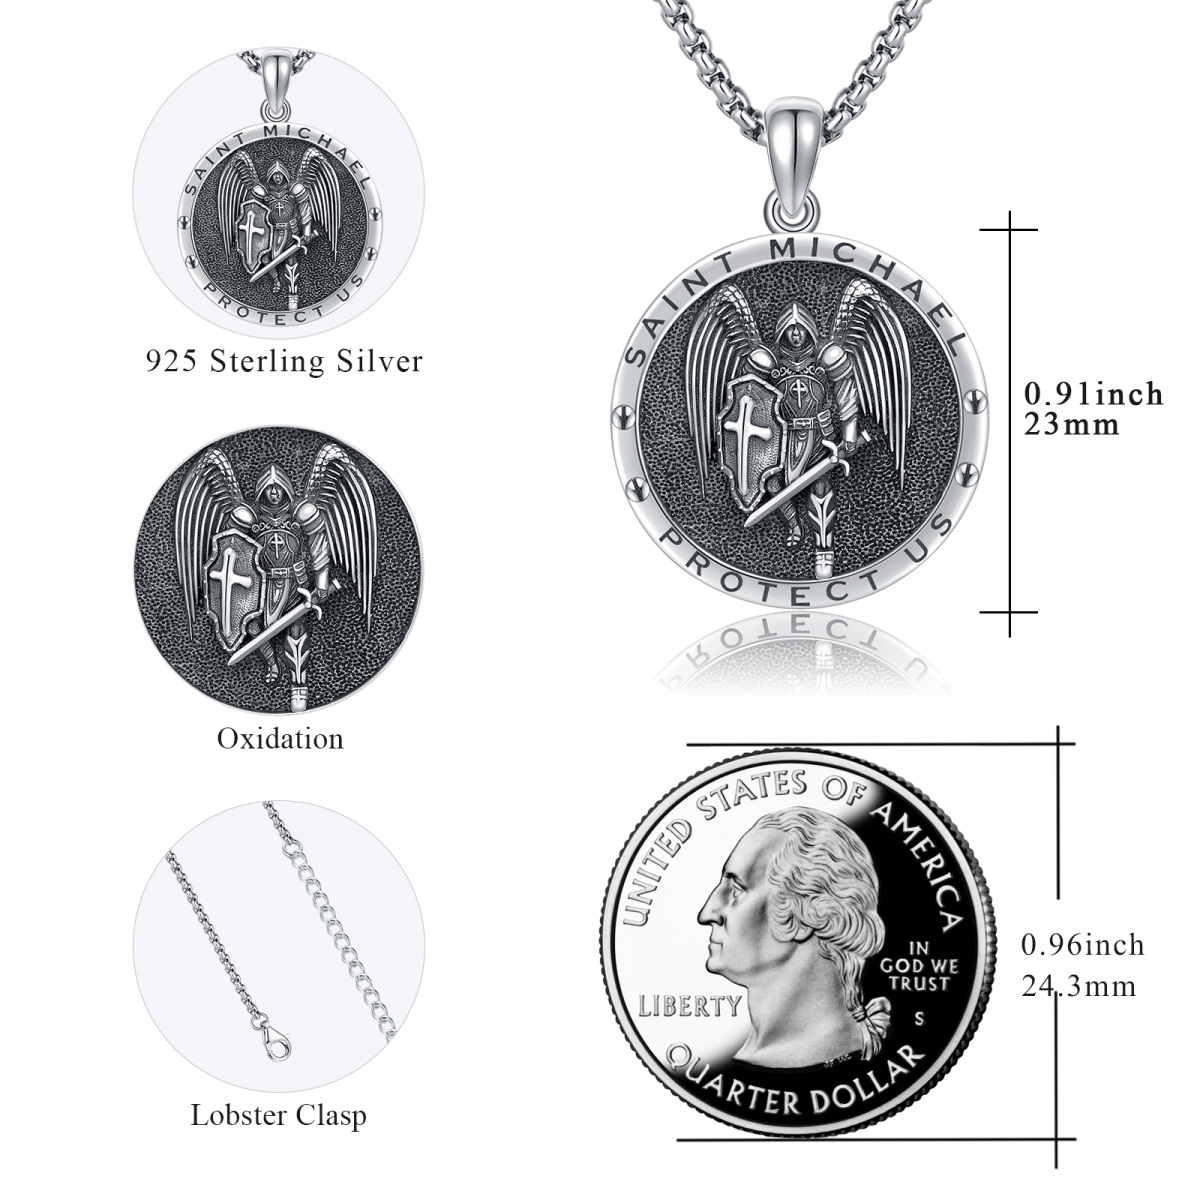 Sterling Silver Saint Michael Vintage Coin Pendant Necklace with Engraved Words for Men-6